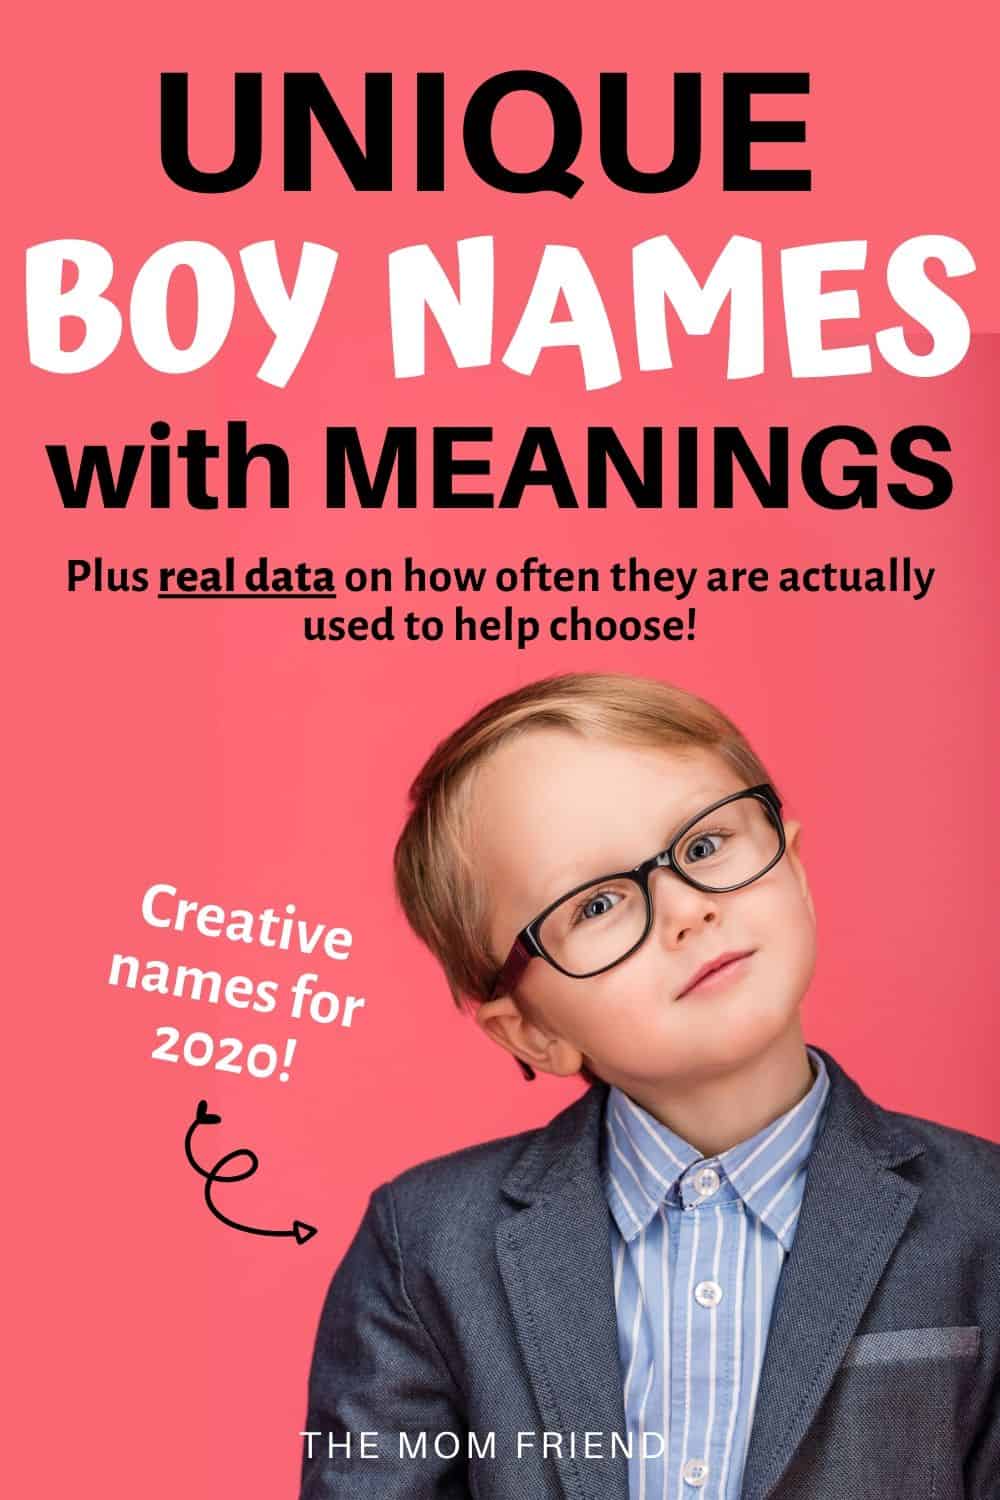 Graphic for Unique Boy Names with meanings.